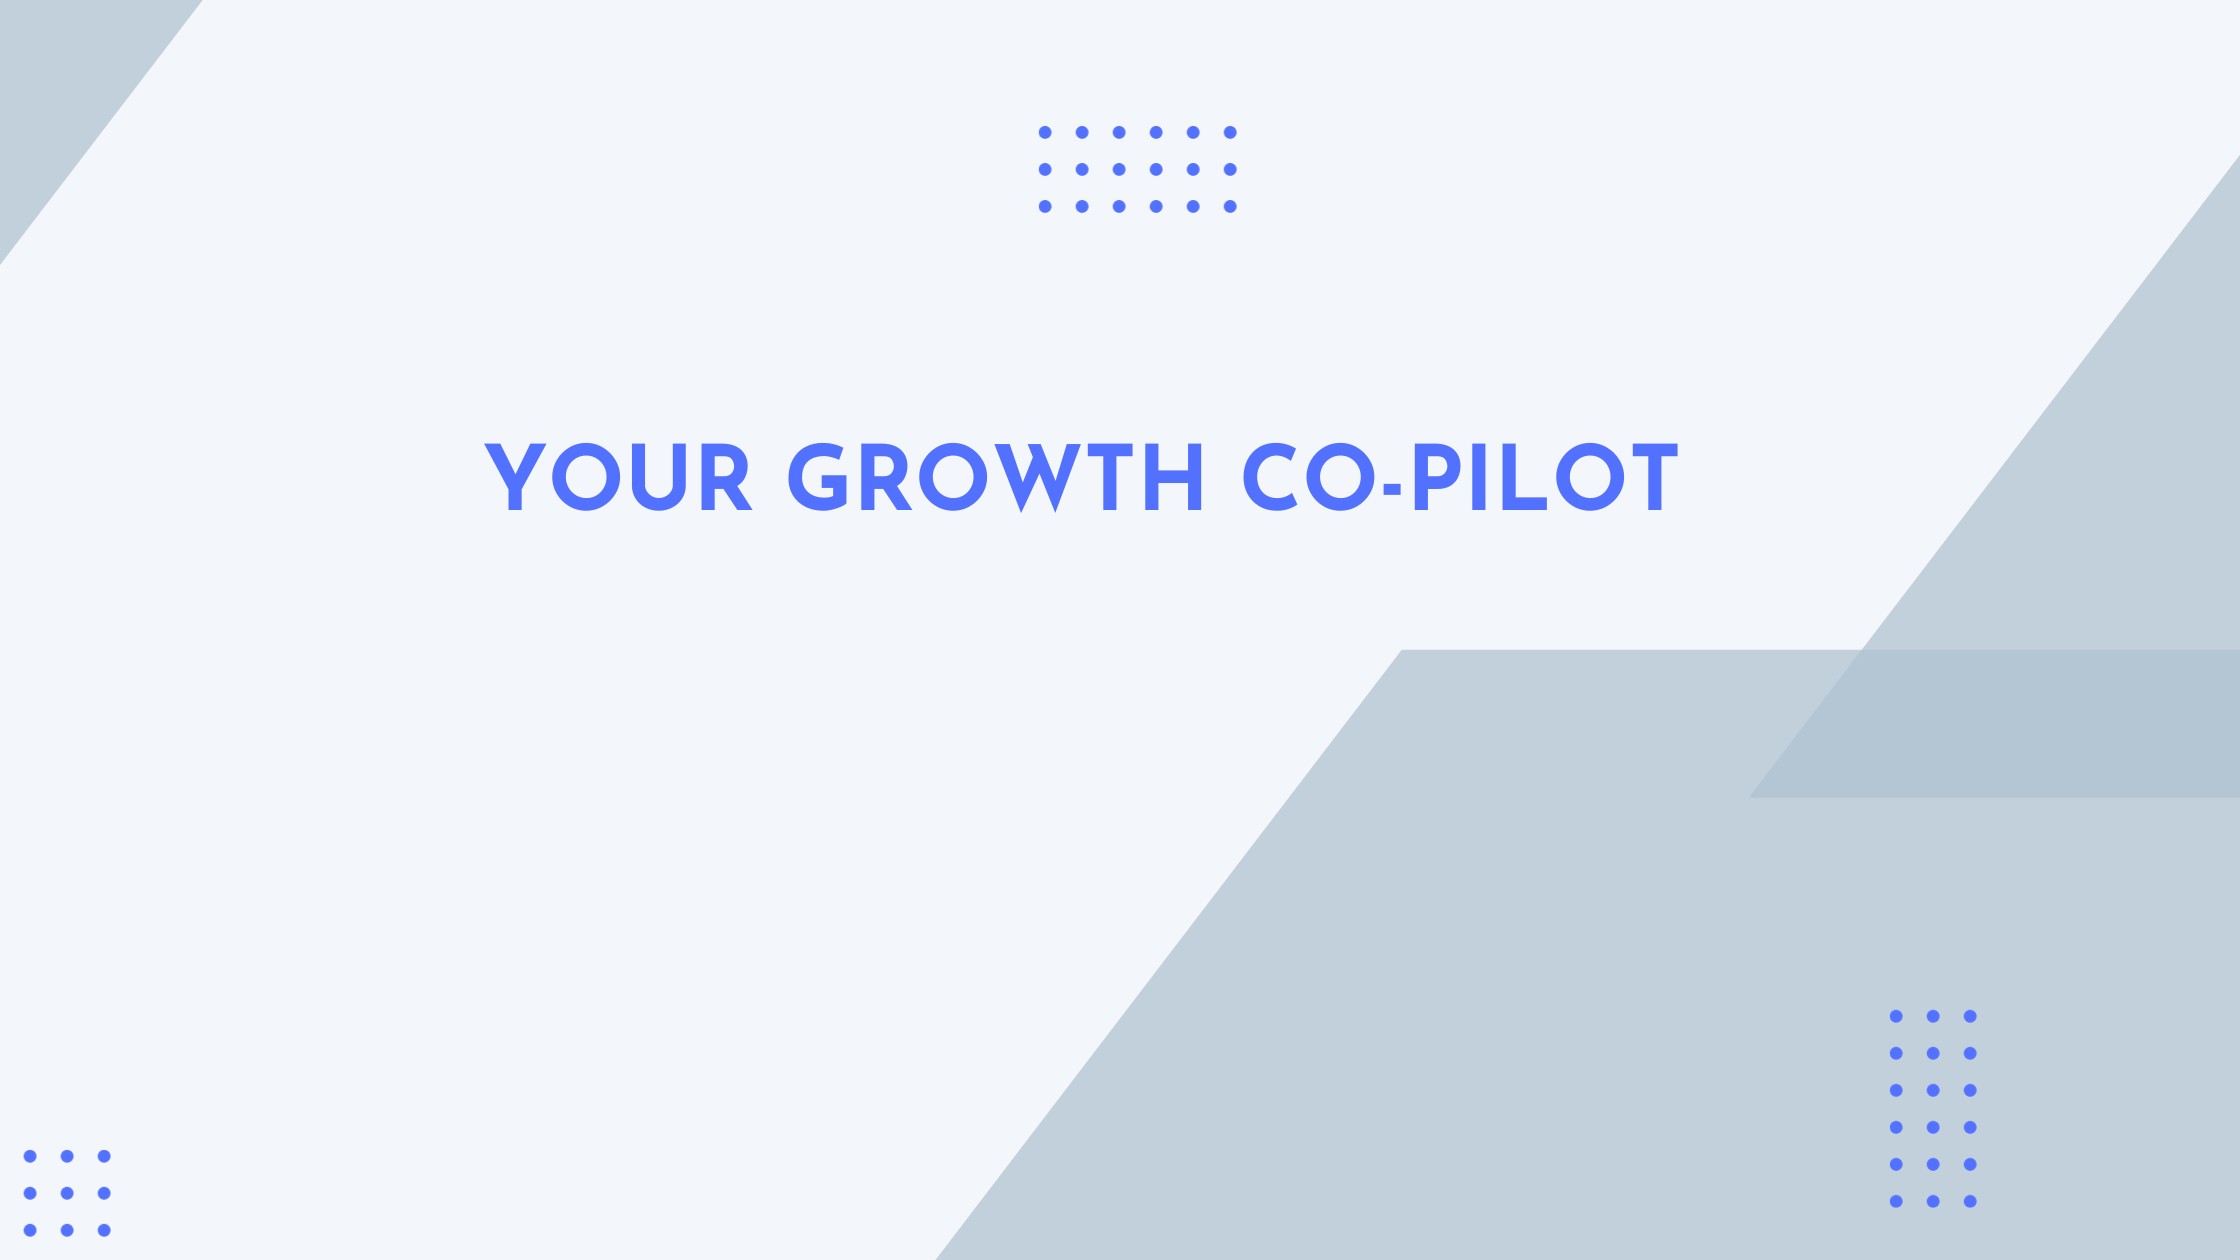 Your growth co-pilot